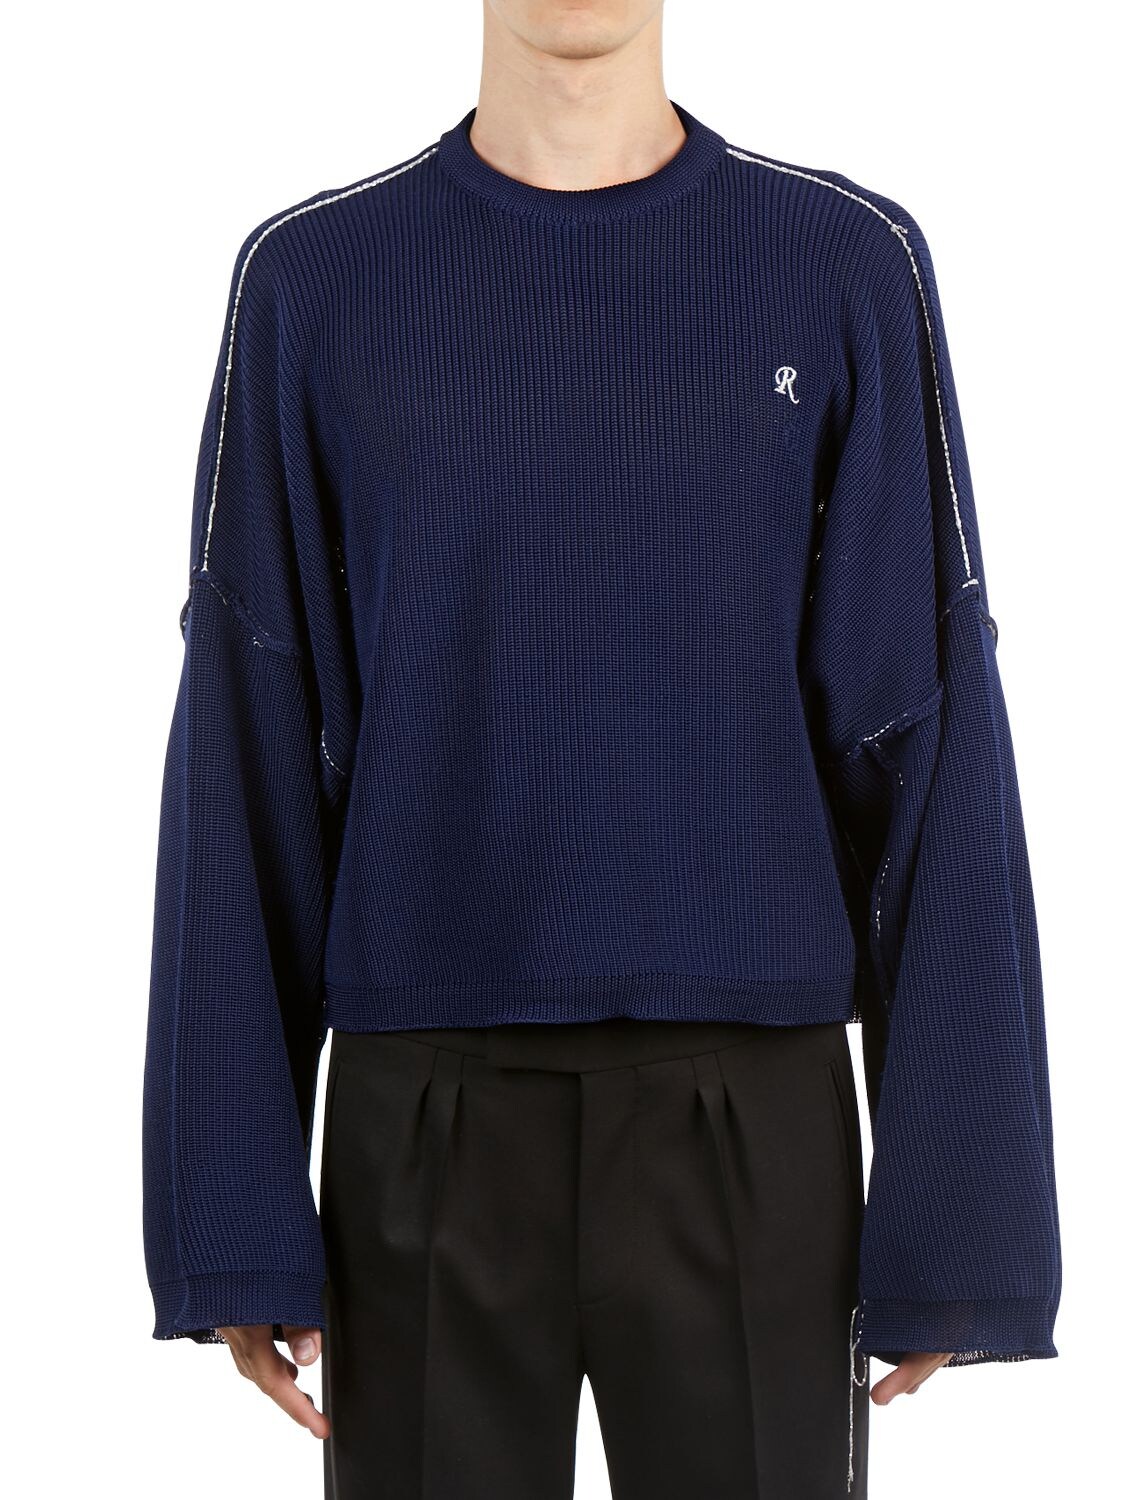 RAF SIMONS EMBROIDERED TECH KNIT CROPPED SWEATER,69ID0W019-MDAWNDK1